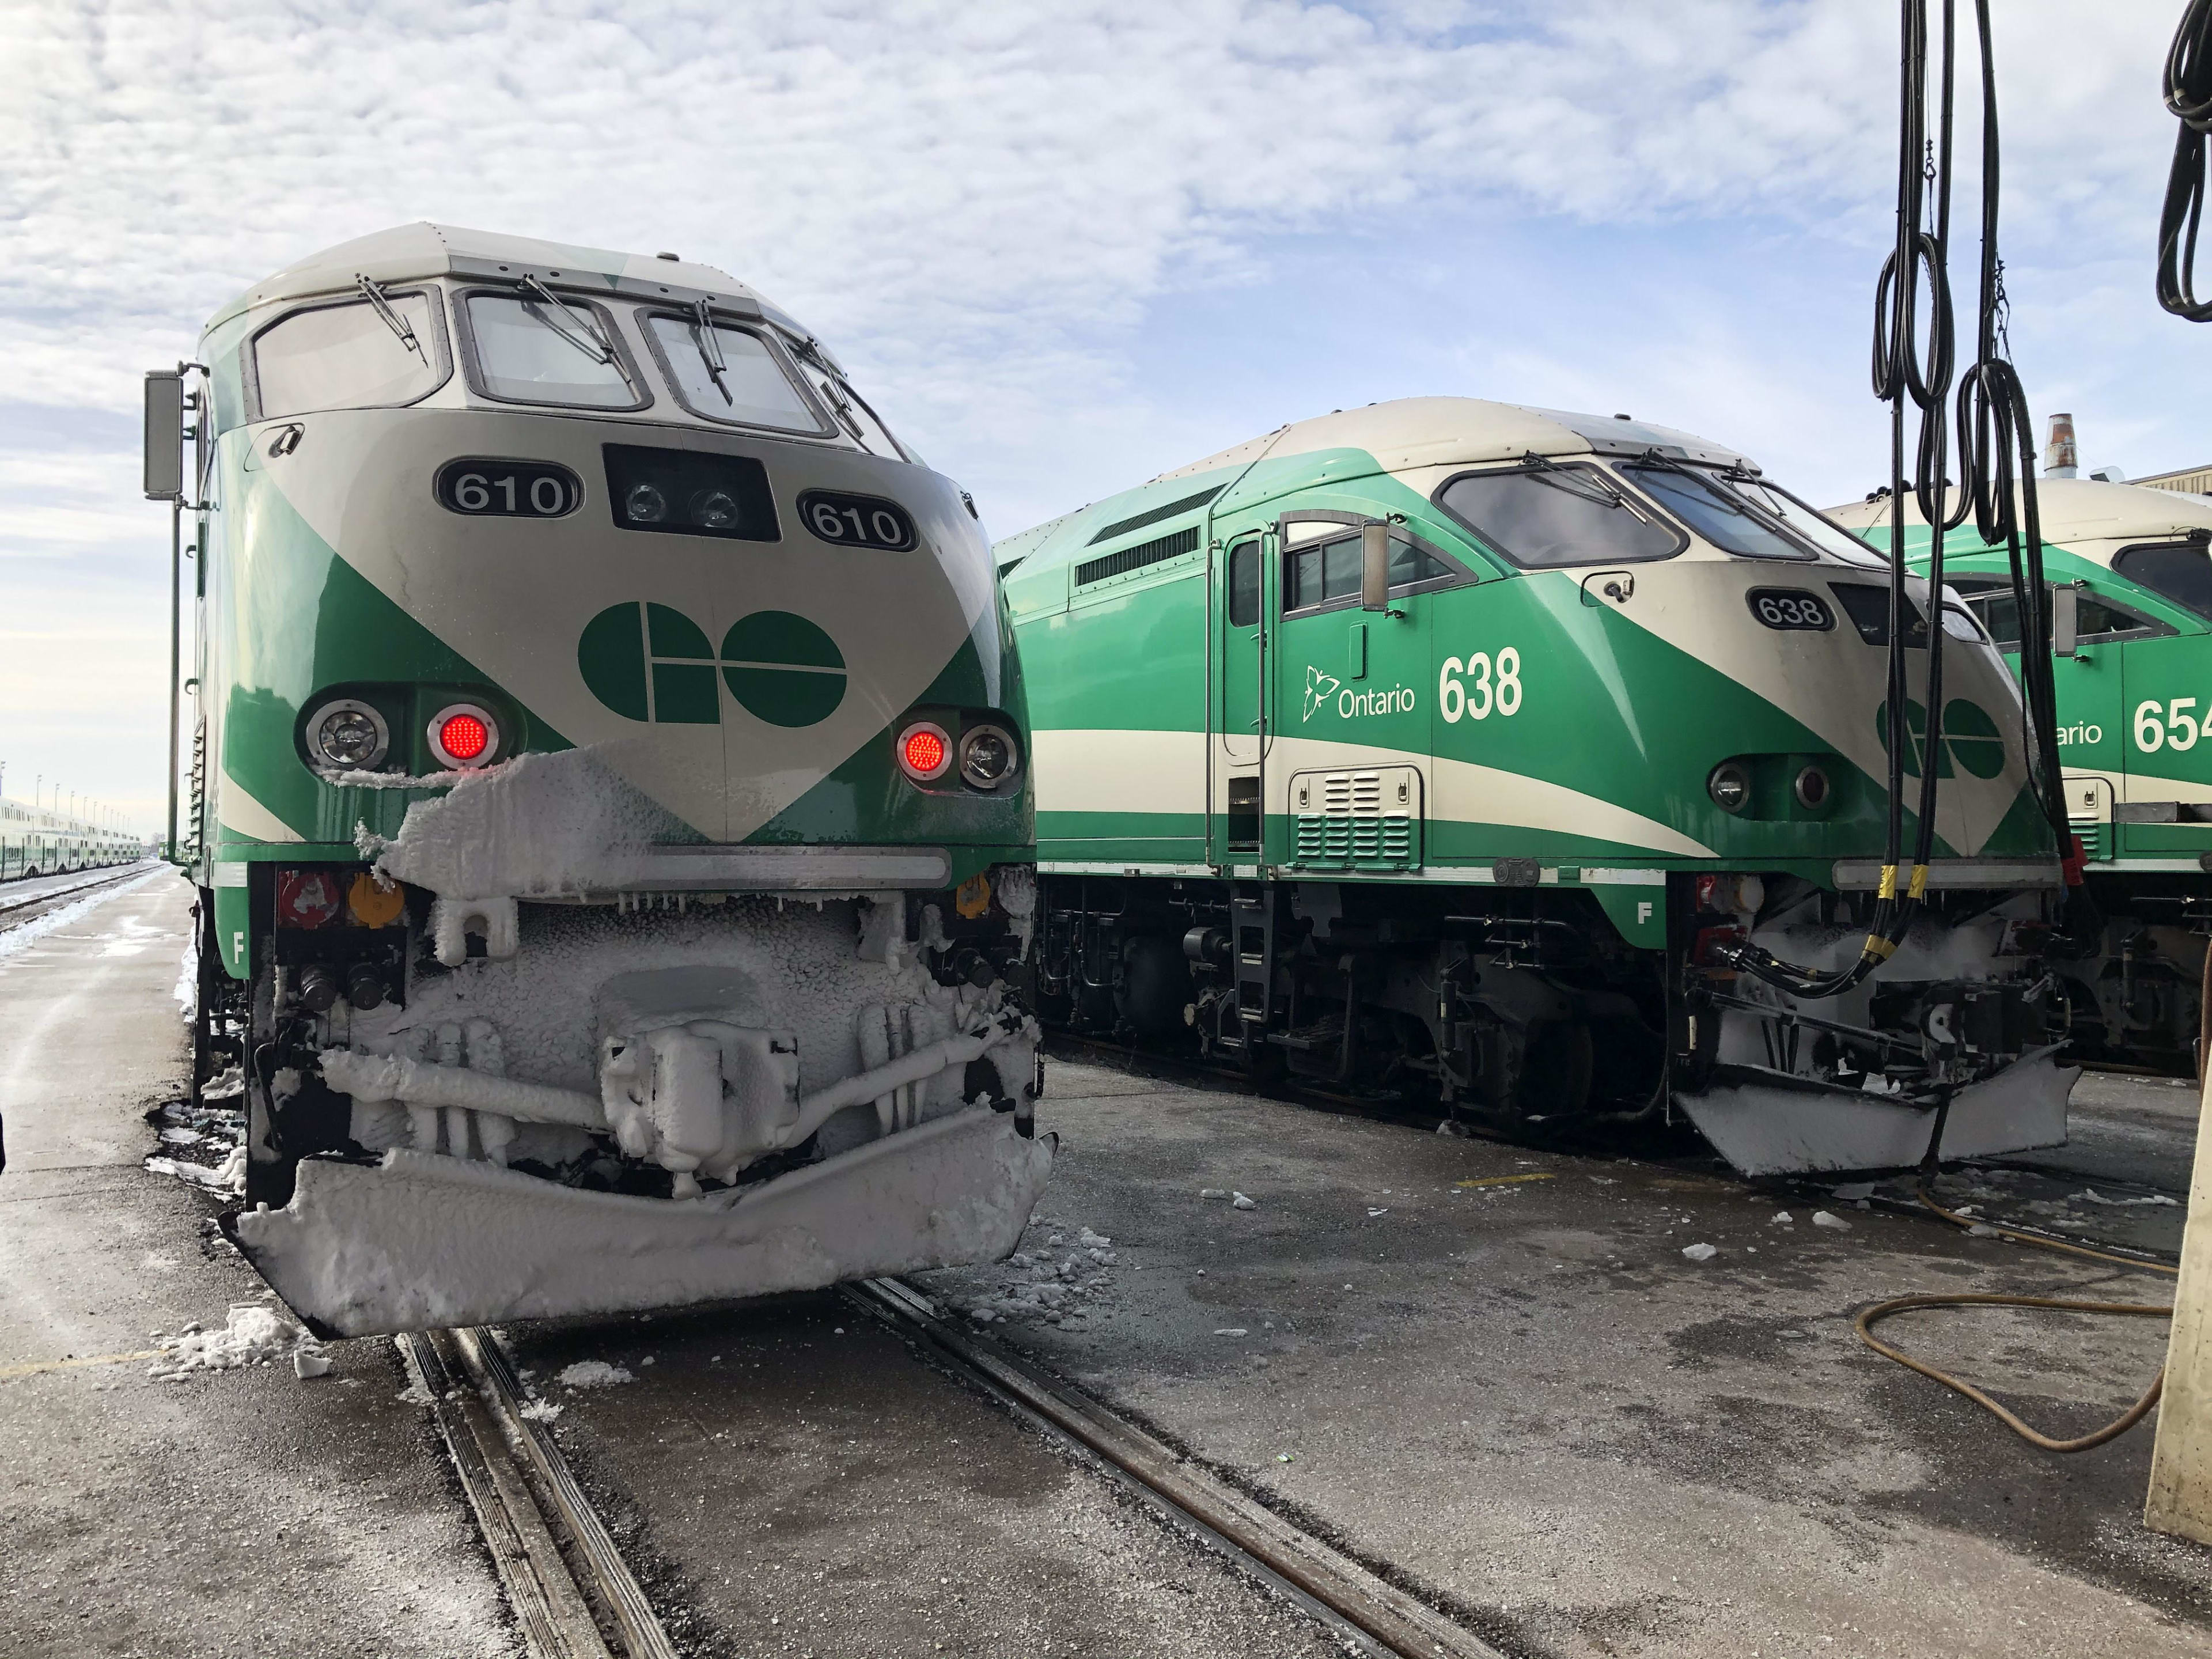 two GO trains, parked side by side in the cold.